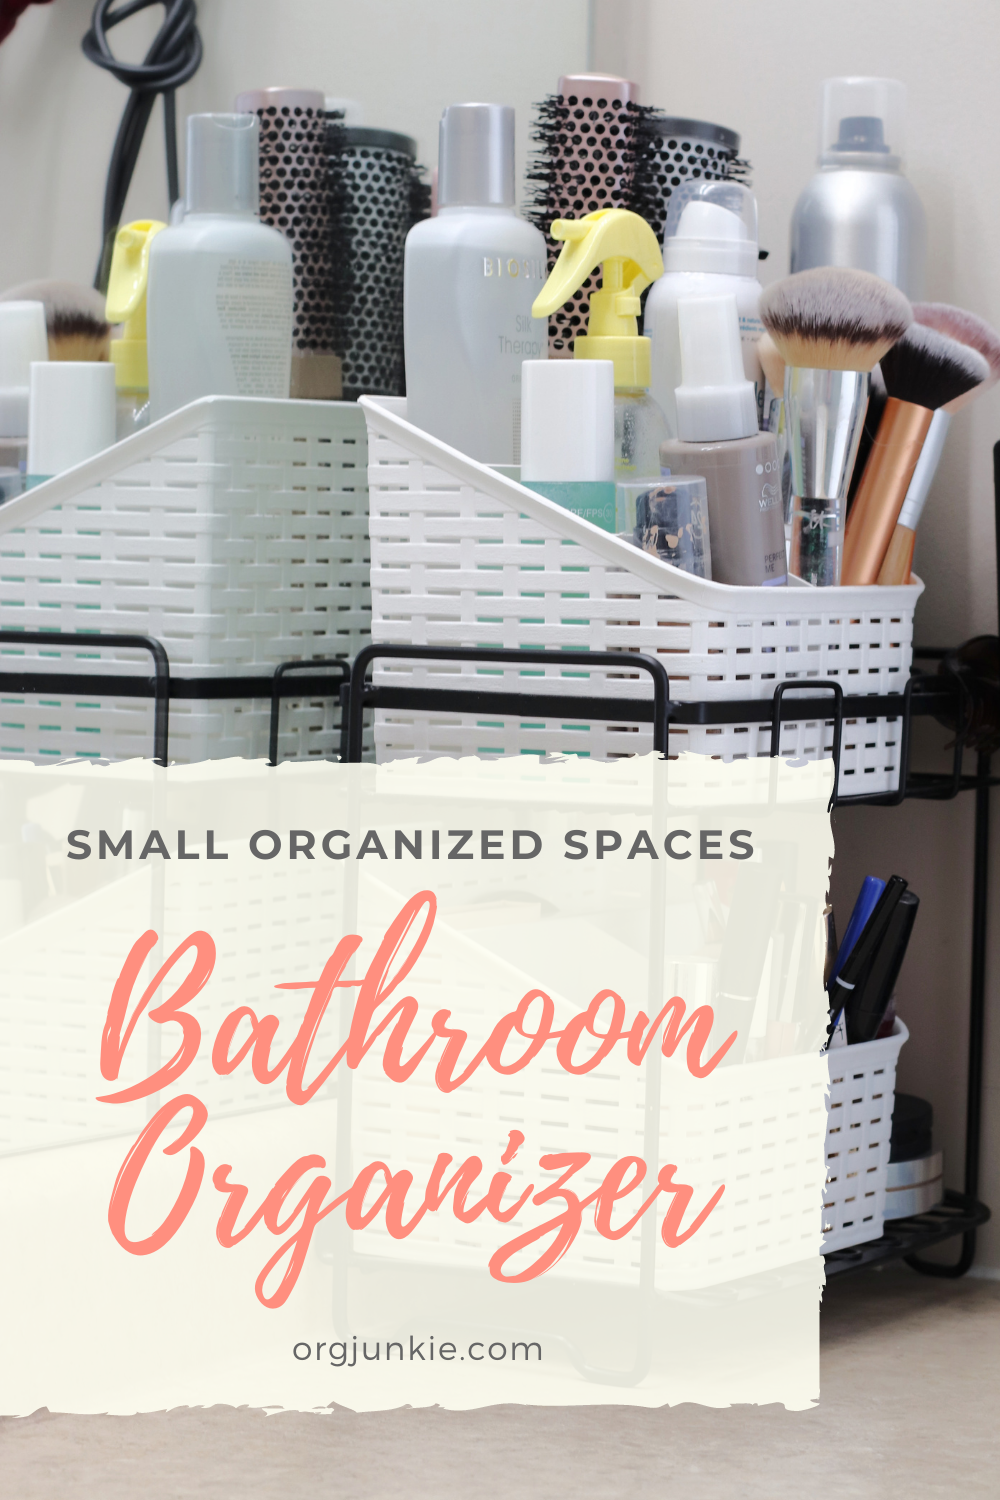 Small Organized Spaces ~ Bathroom Organizer for Hair & Makeup Products at I'm an Organizing Junkie blog